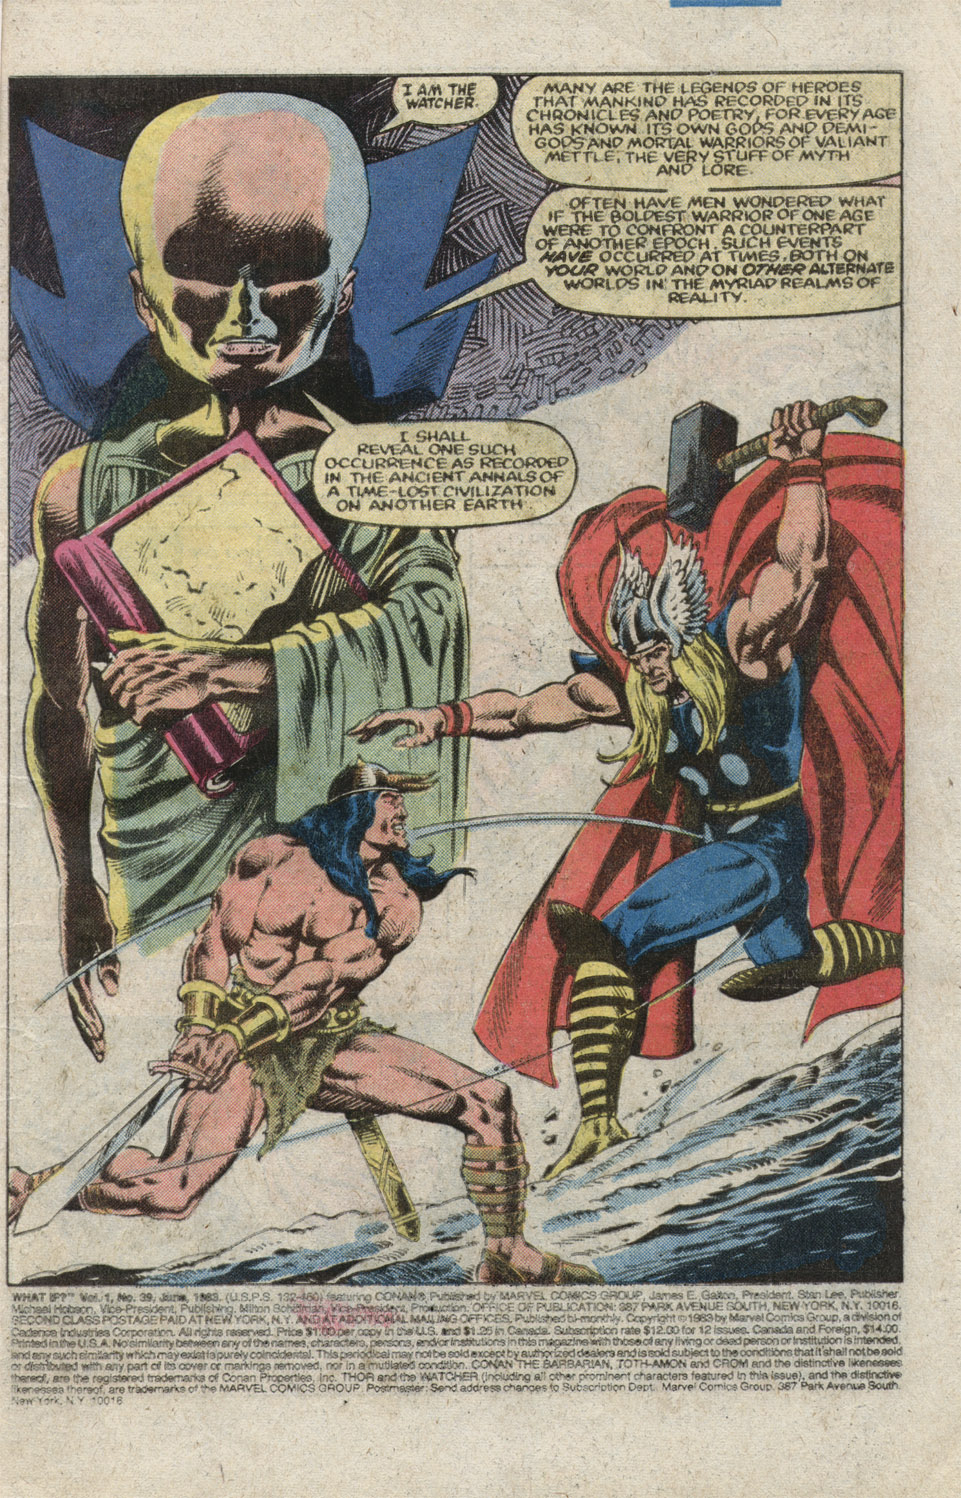 What If? (1977) issue 39 - Thor battled conan - Page 3